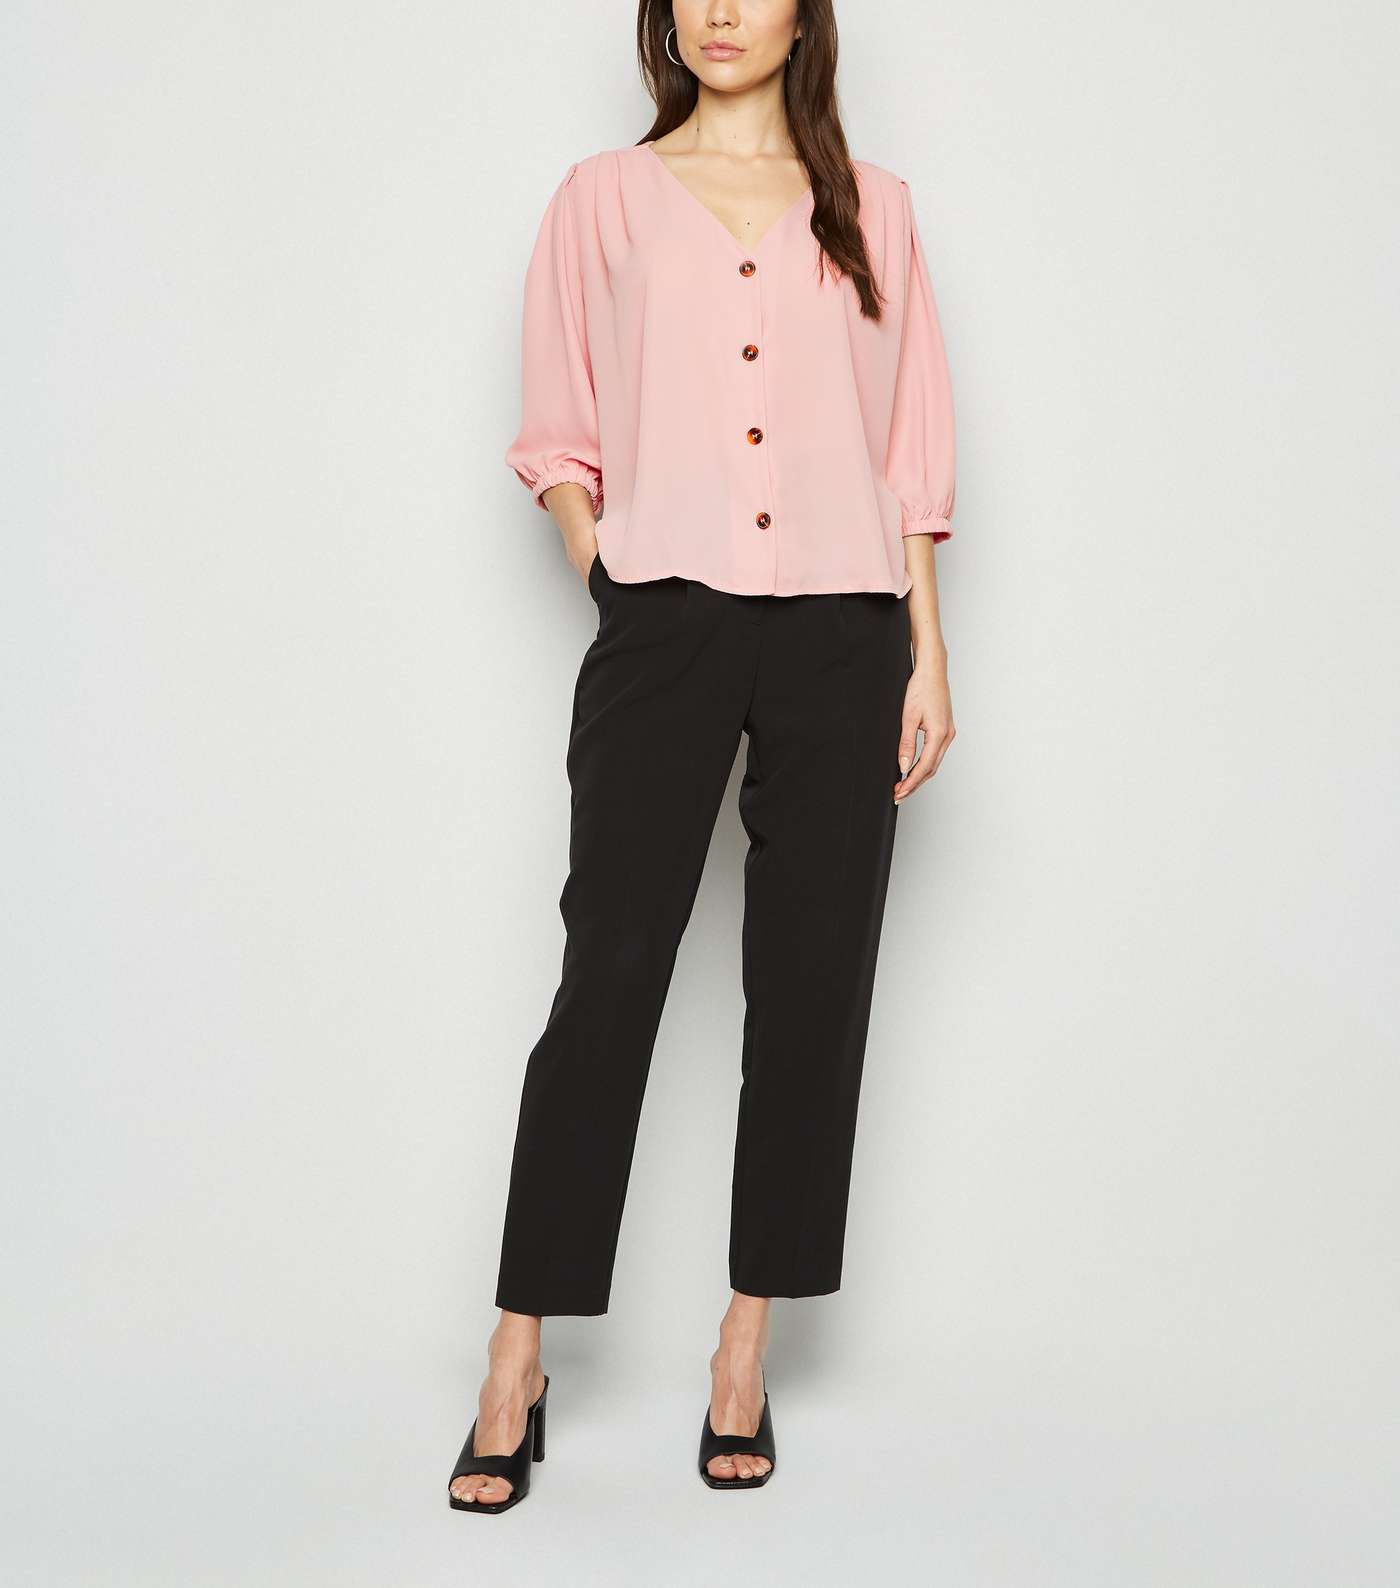 Cameo Rose Pale Pink Button Up Blouse Image 2